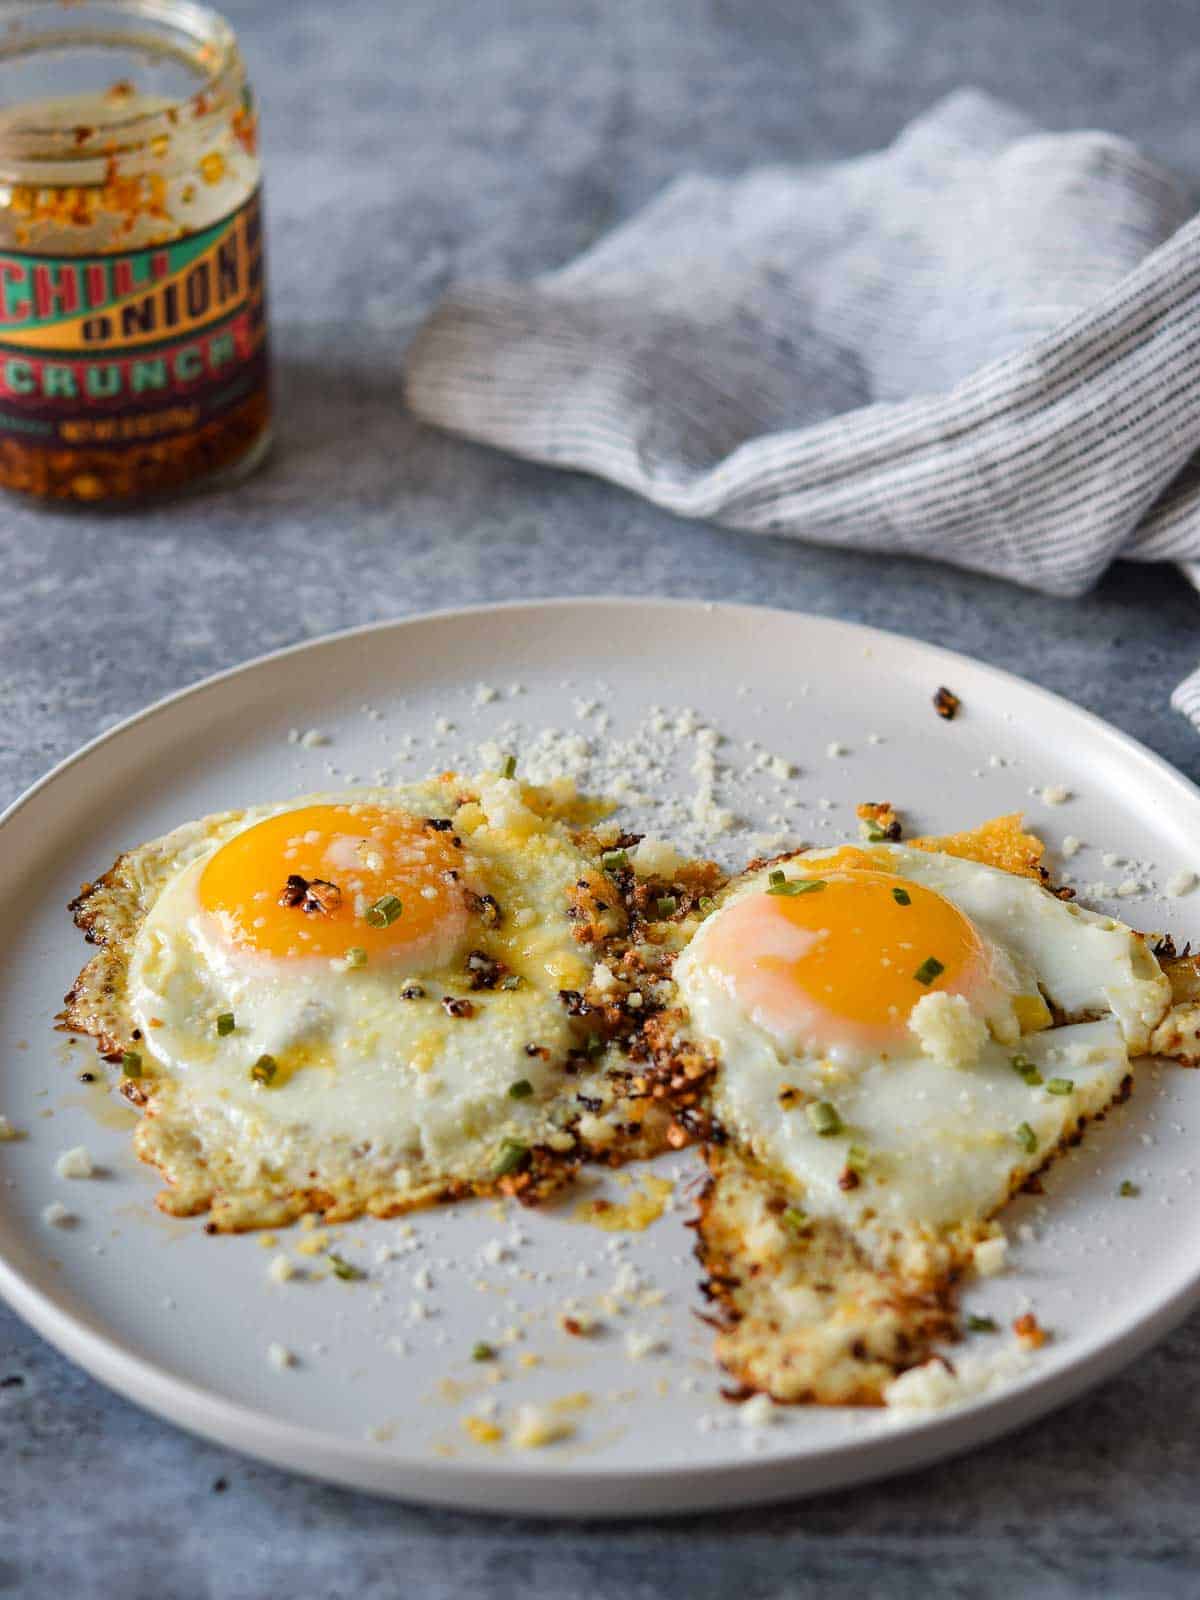 Angled view of two fried eggs on a plate with a jar of chili crunch in the background.